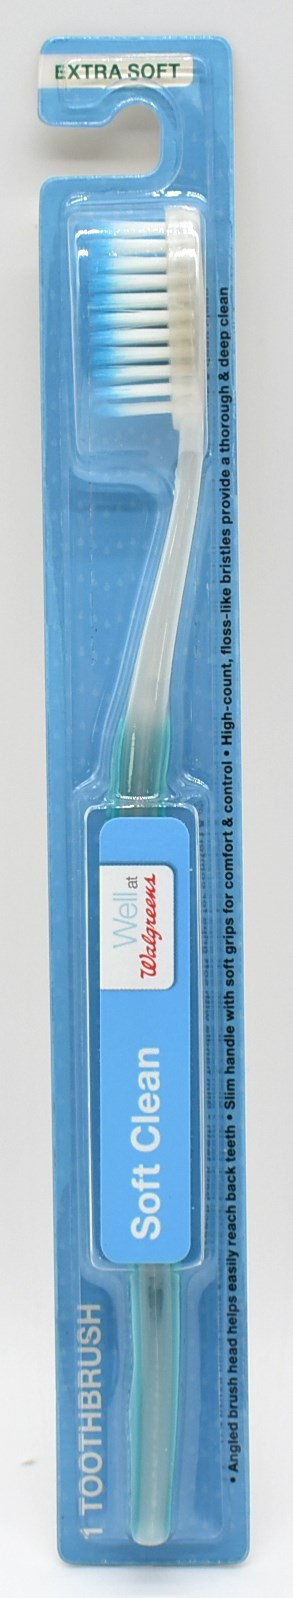 TOOTHBRUSH, WALGREENS, EXTRA SOFT, BLISTER CARD, PEGGABLE